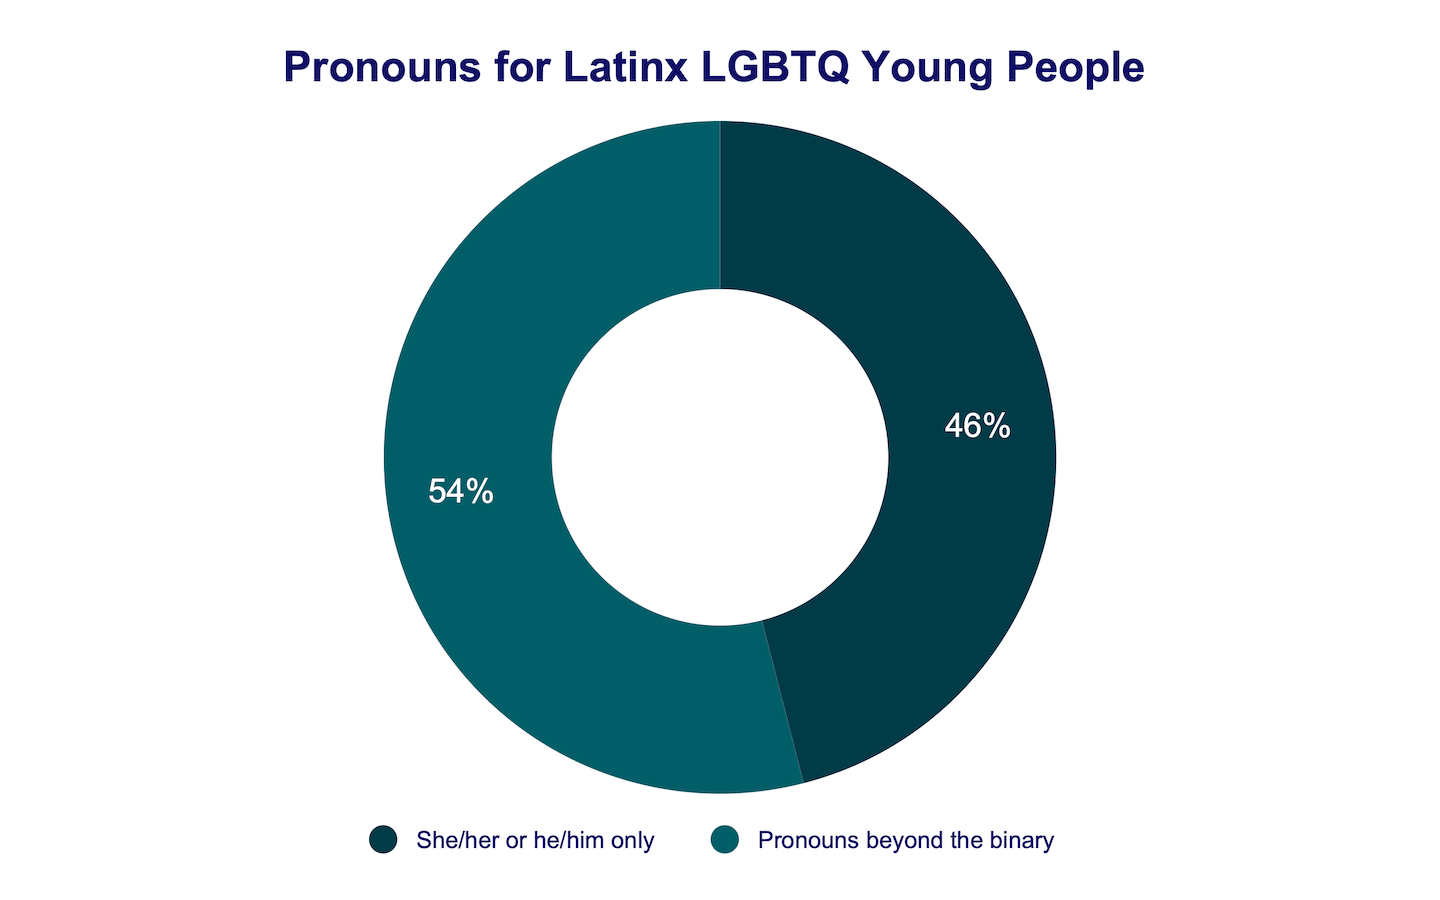 Pronouns for Latinx LGBTQ young people donut graph